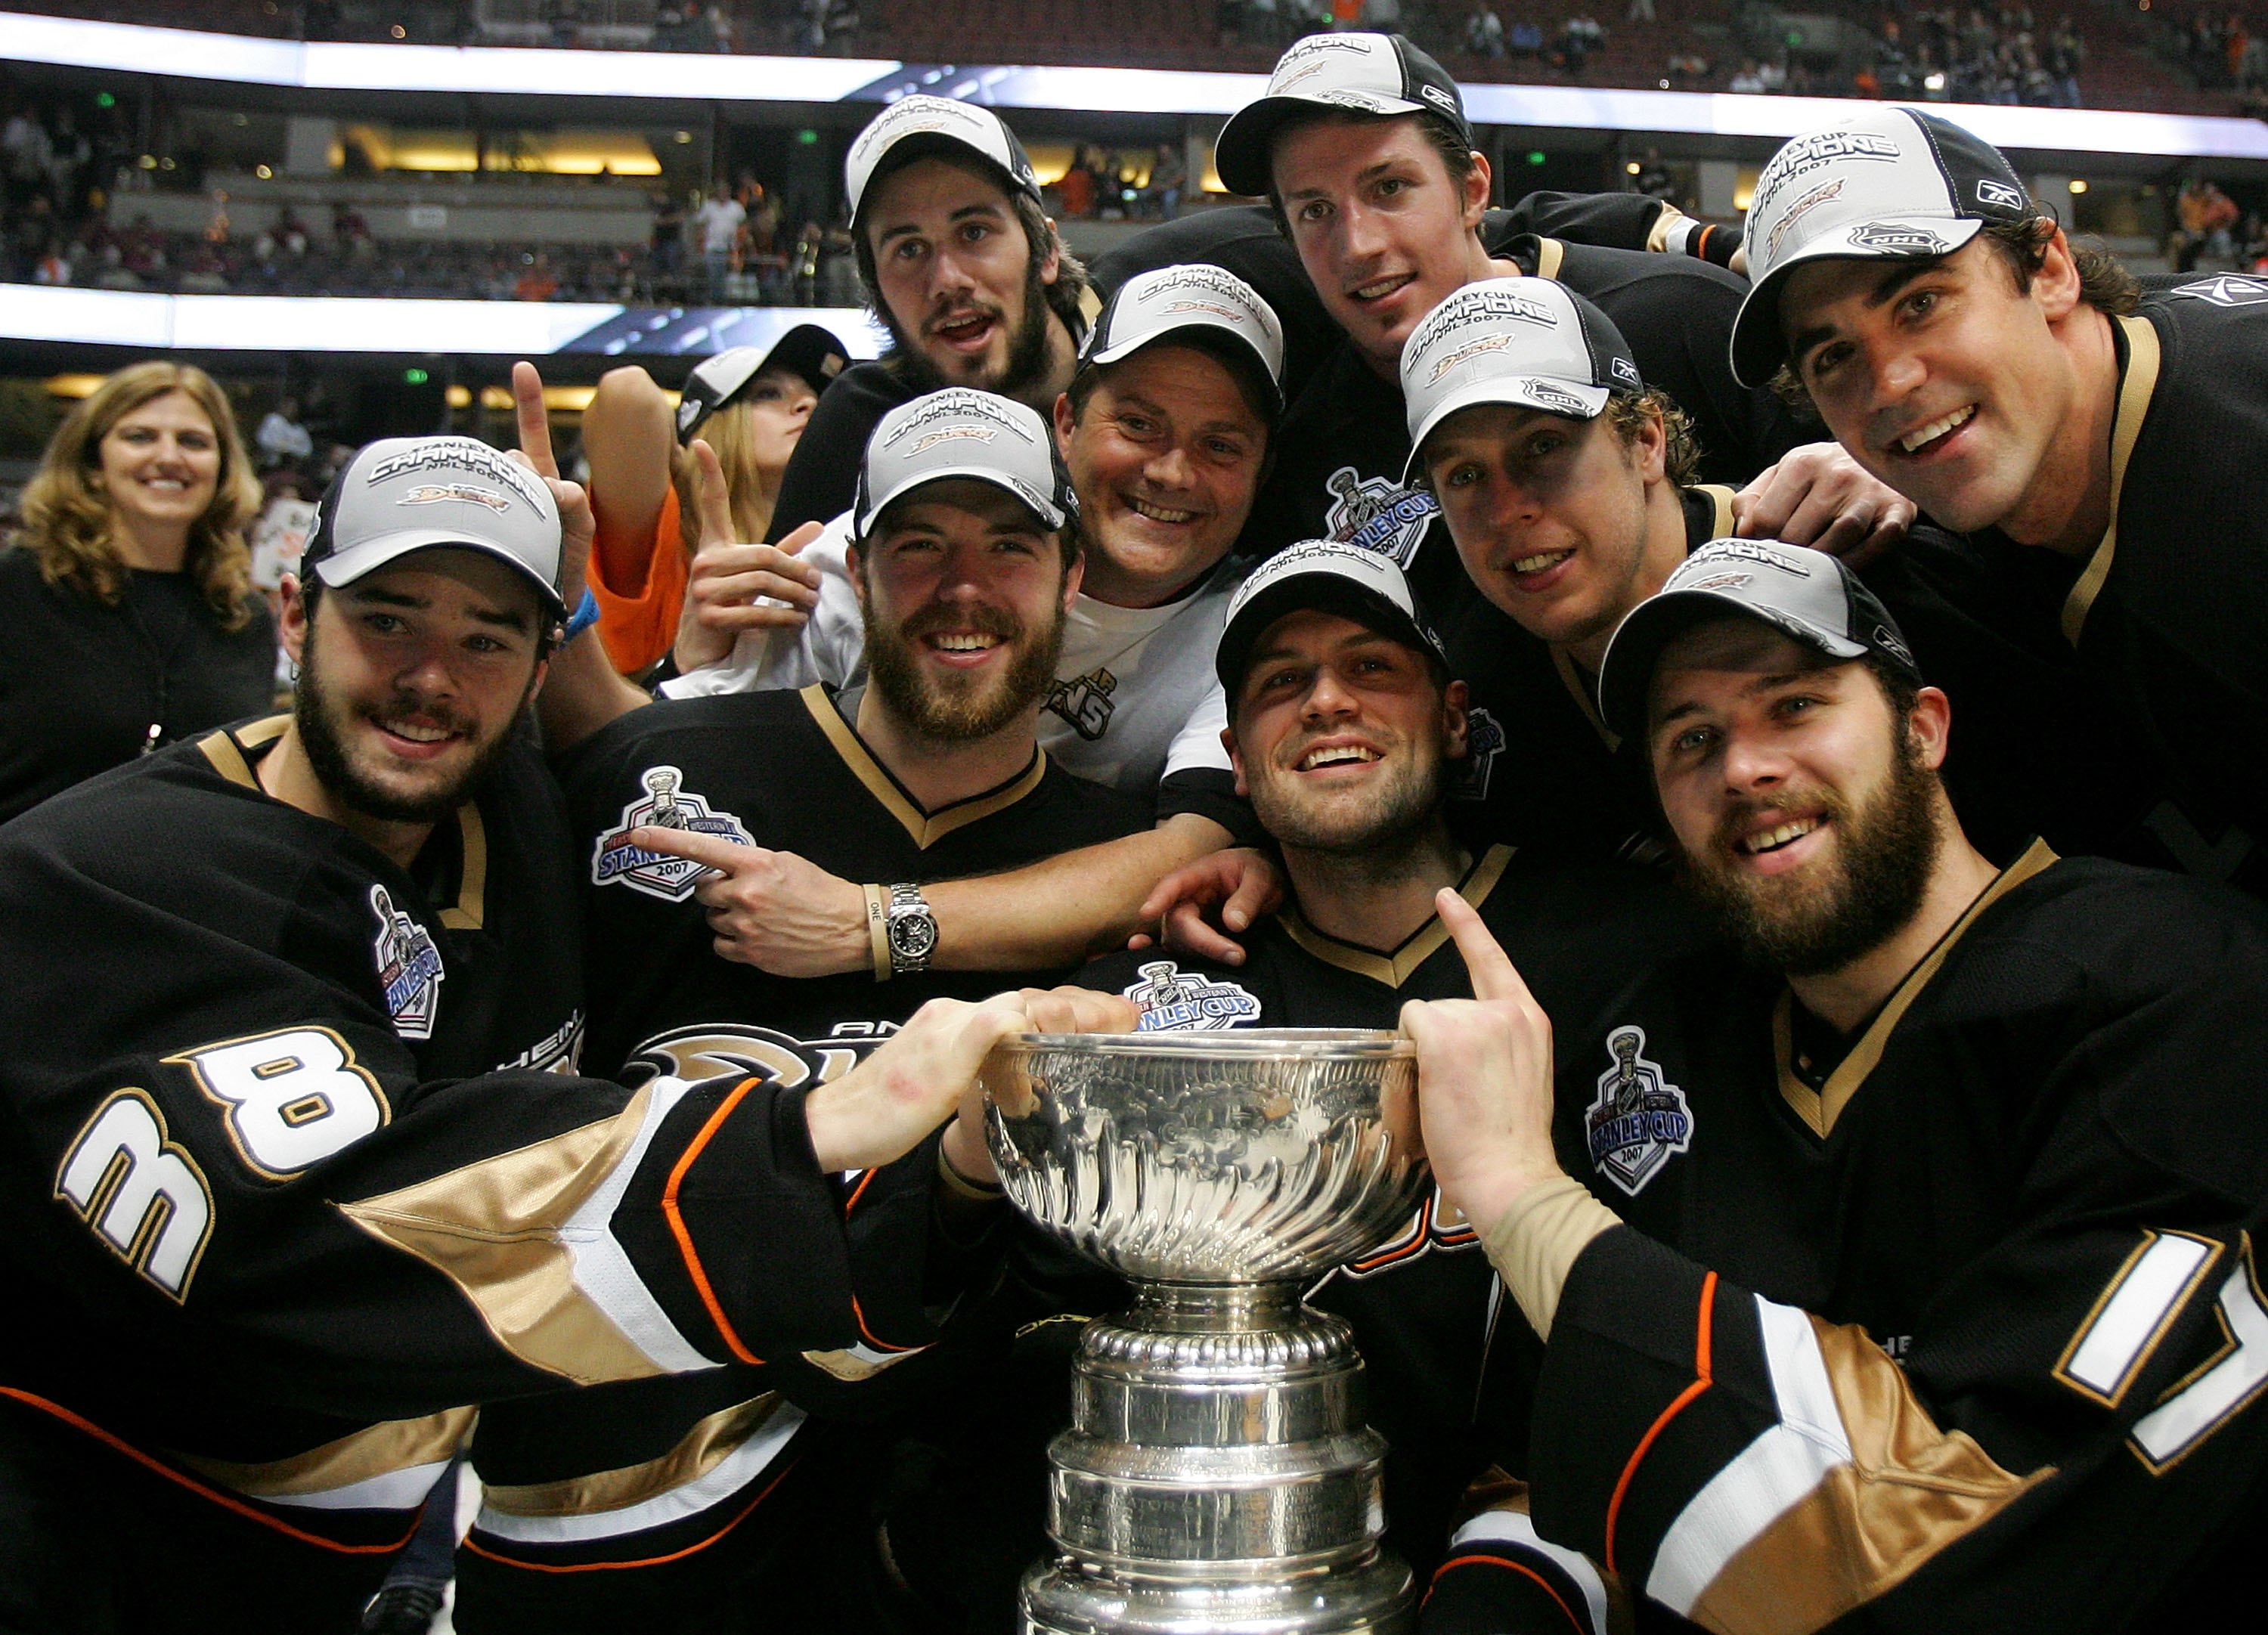 ANAHEIM, CA - JUNE 06: Members of the Anaheim Ducks pose with the Stanley Cup after their 6-2 victory over the Ottawa Senators in Game 5 of the Stanley Cup Final June 6, 2007 at Honda Center in Anaheim, California.